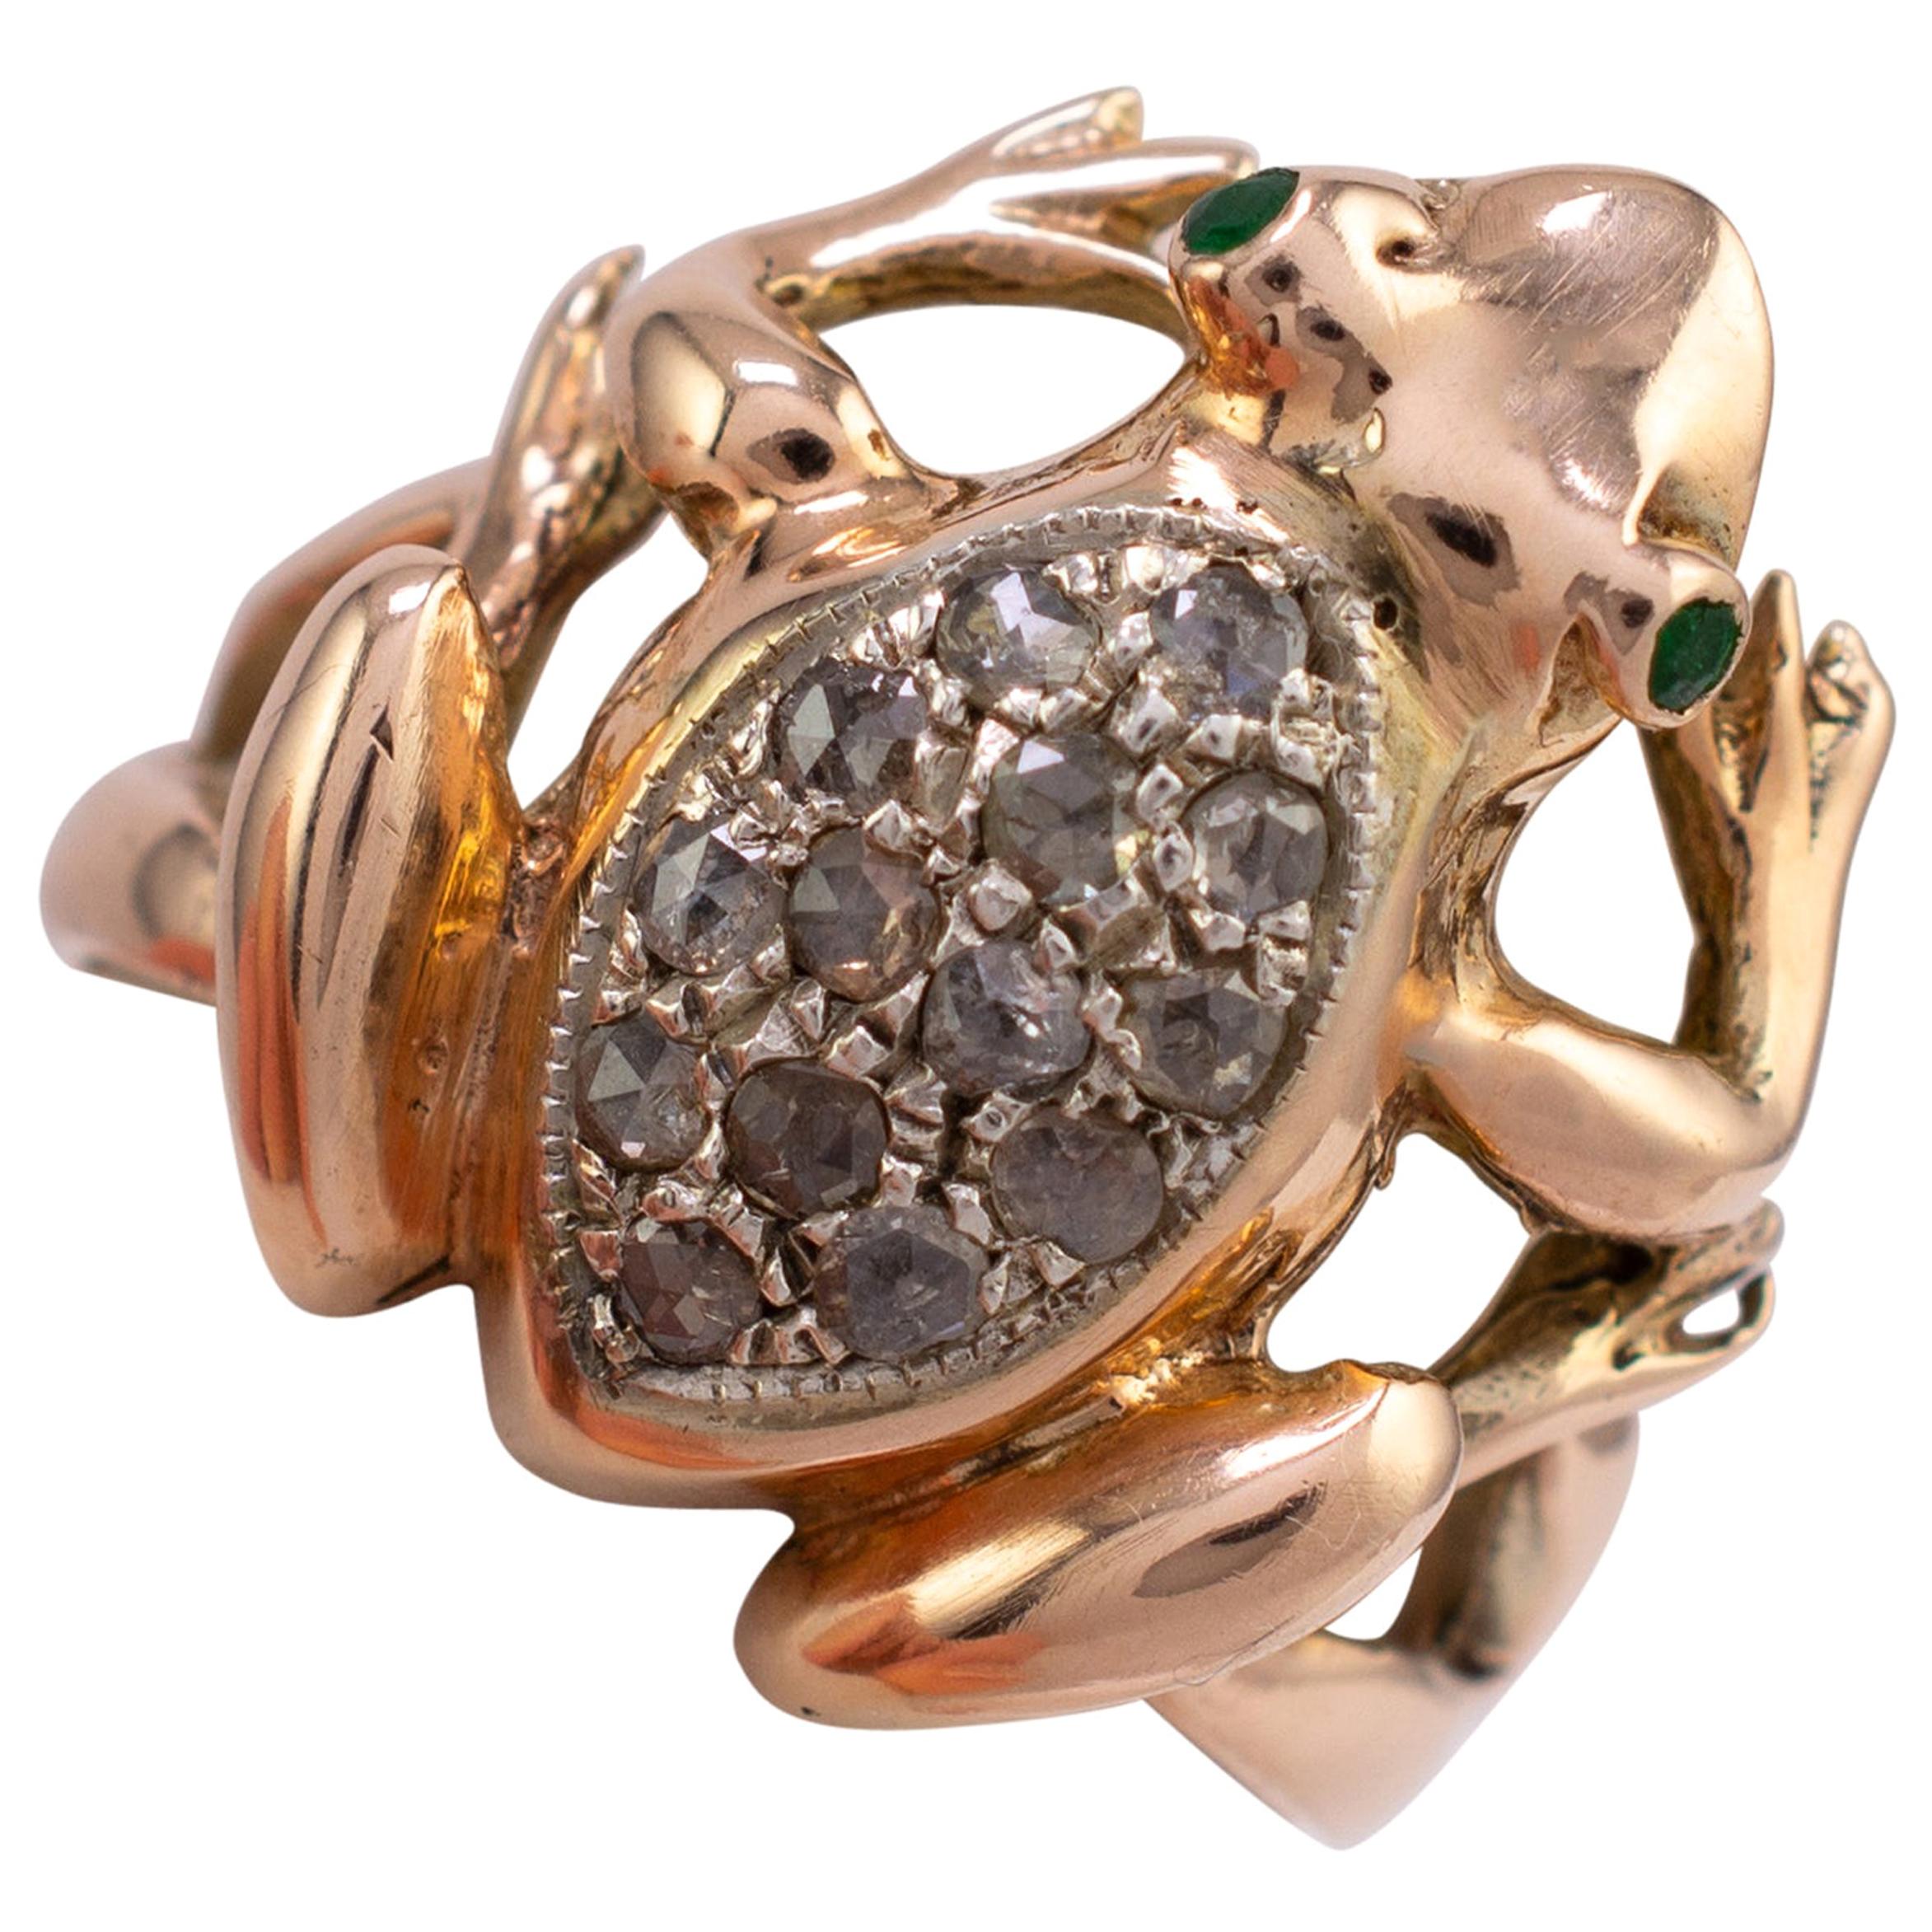 Rose Gold Diamond Emerald Frog Ring Vintage 1970s Fashion Jewelry